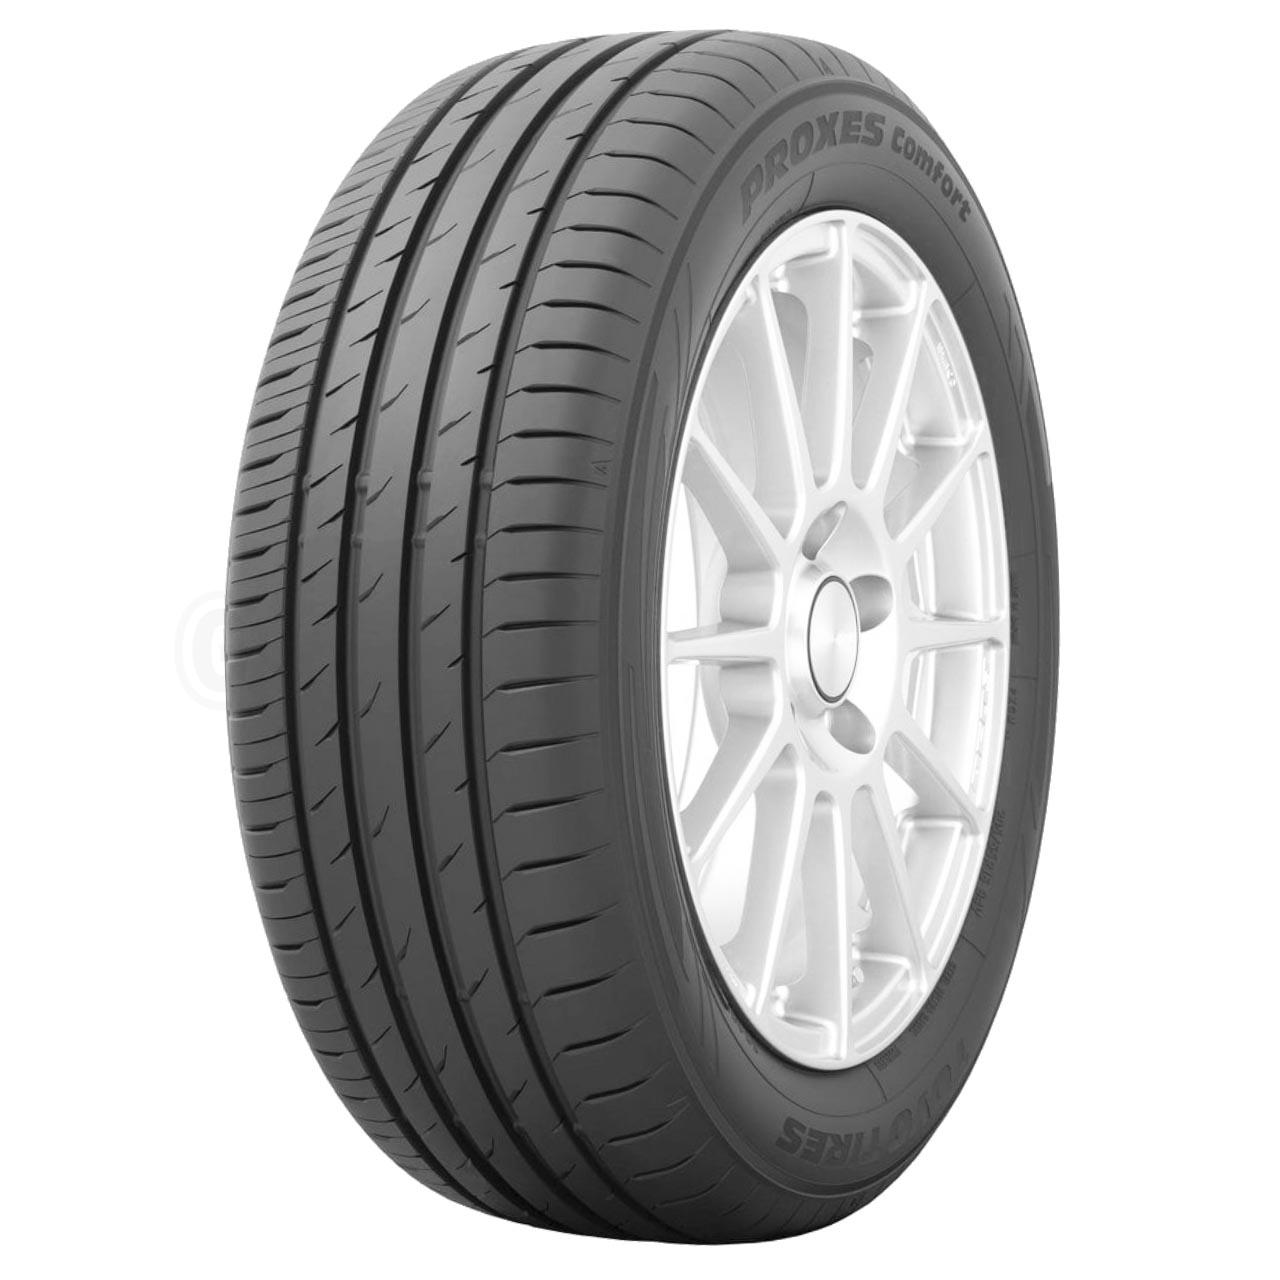 Toyo Proxes Comfort 225/40R18 92W XL